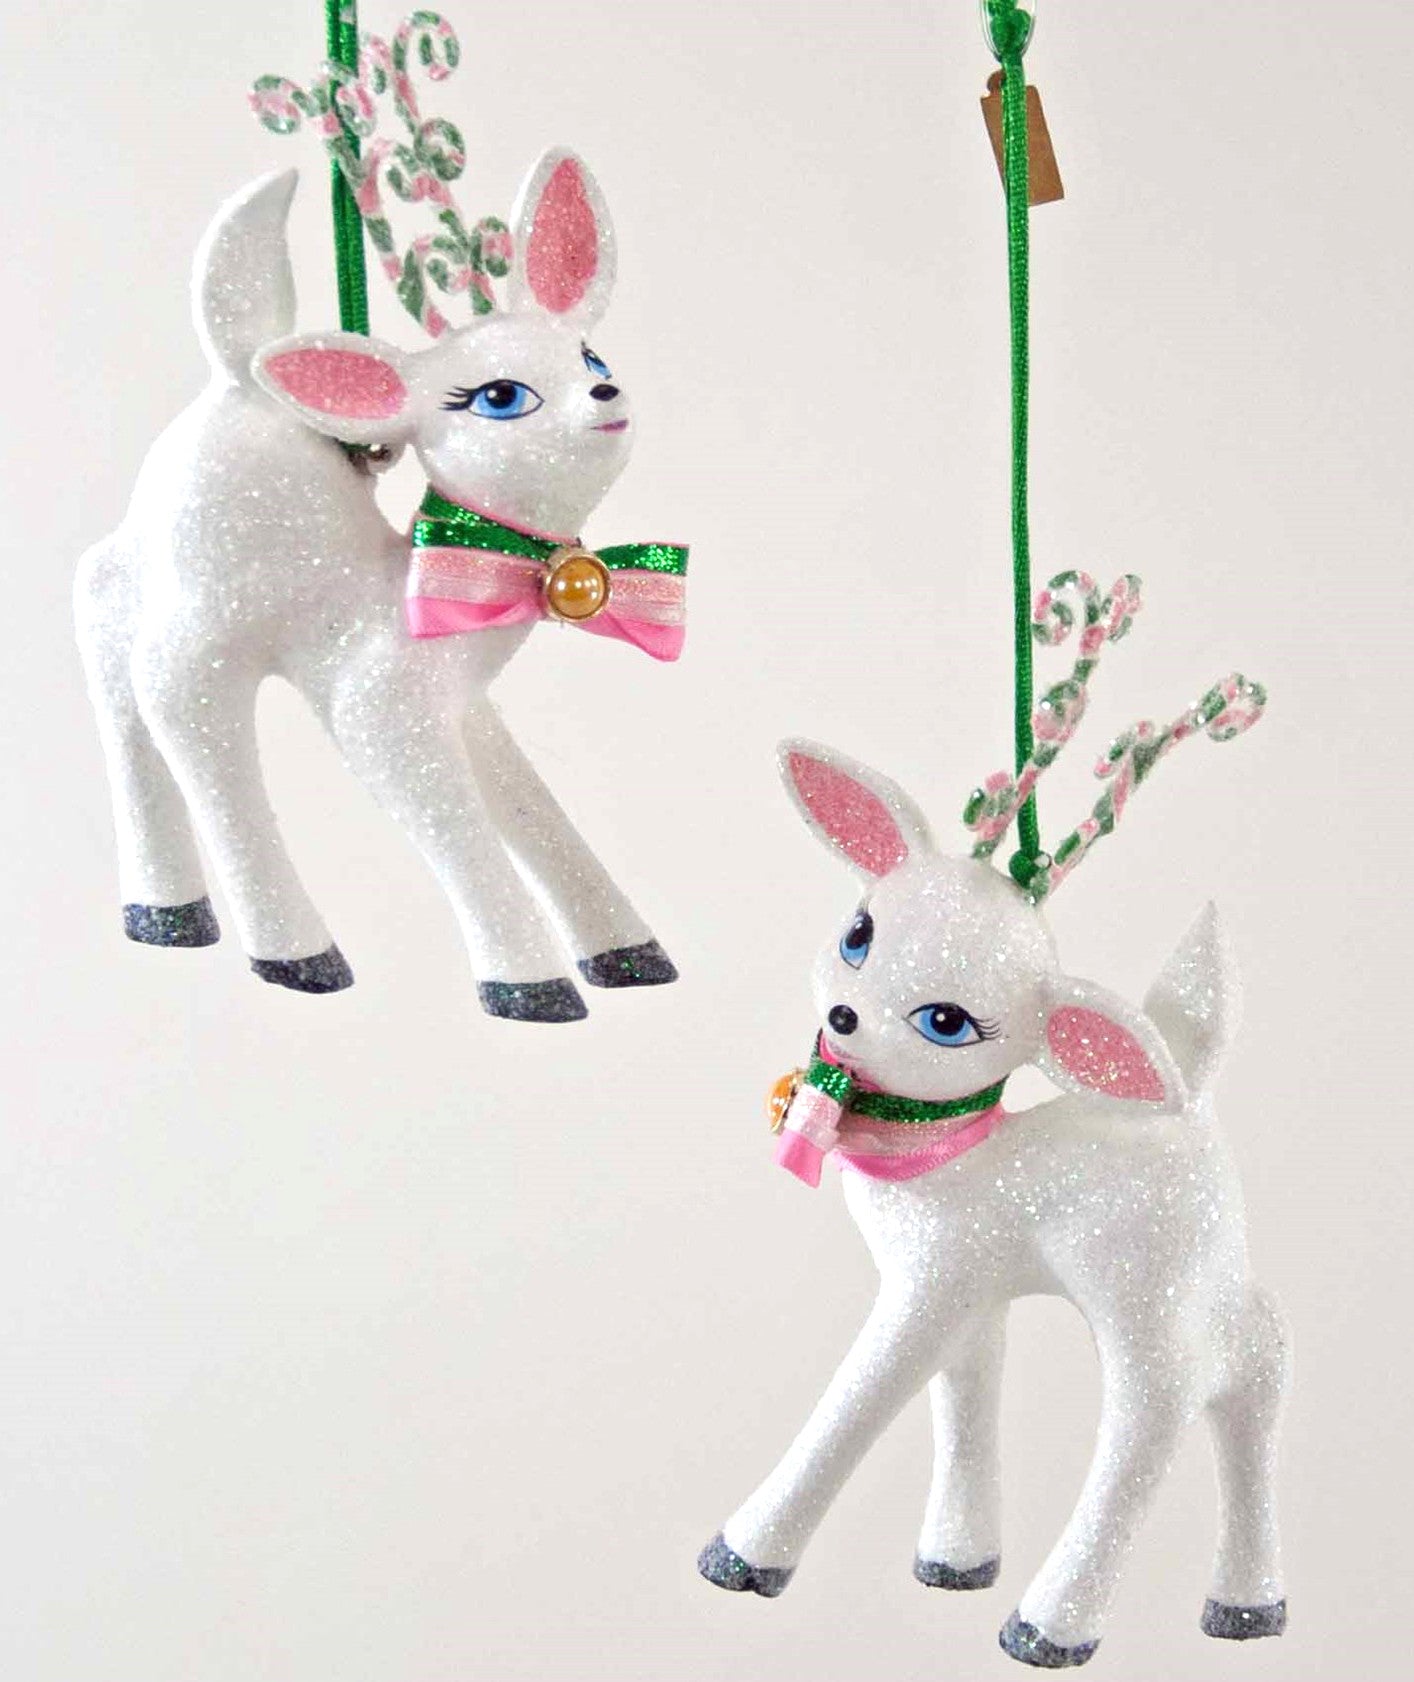 Sweet Retro Reindeer Ornaments- White Deer with Pink and Green Bows